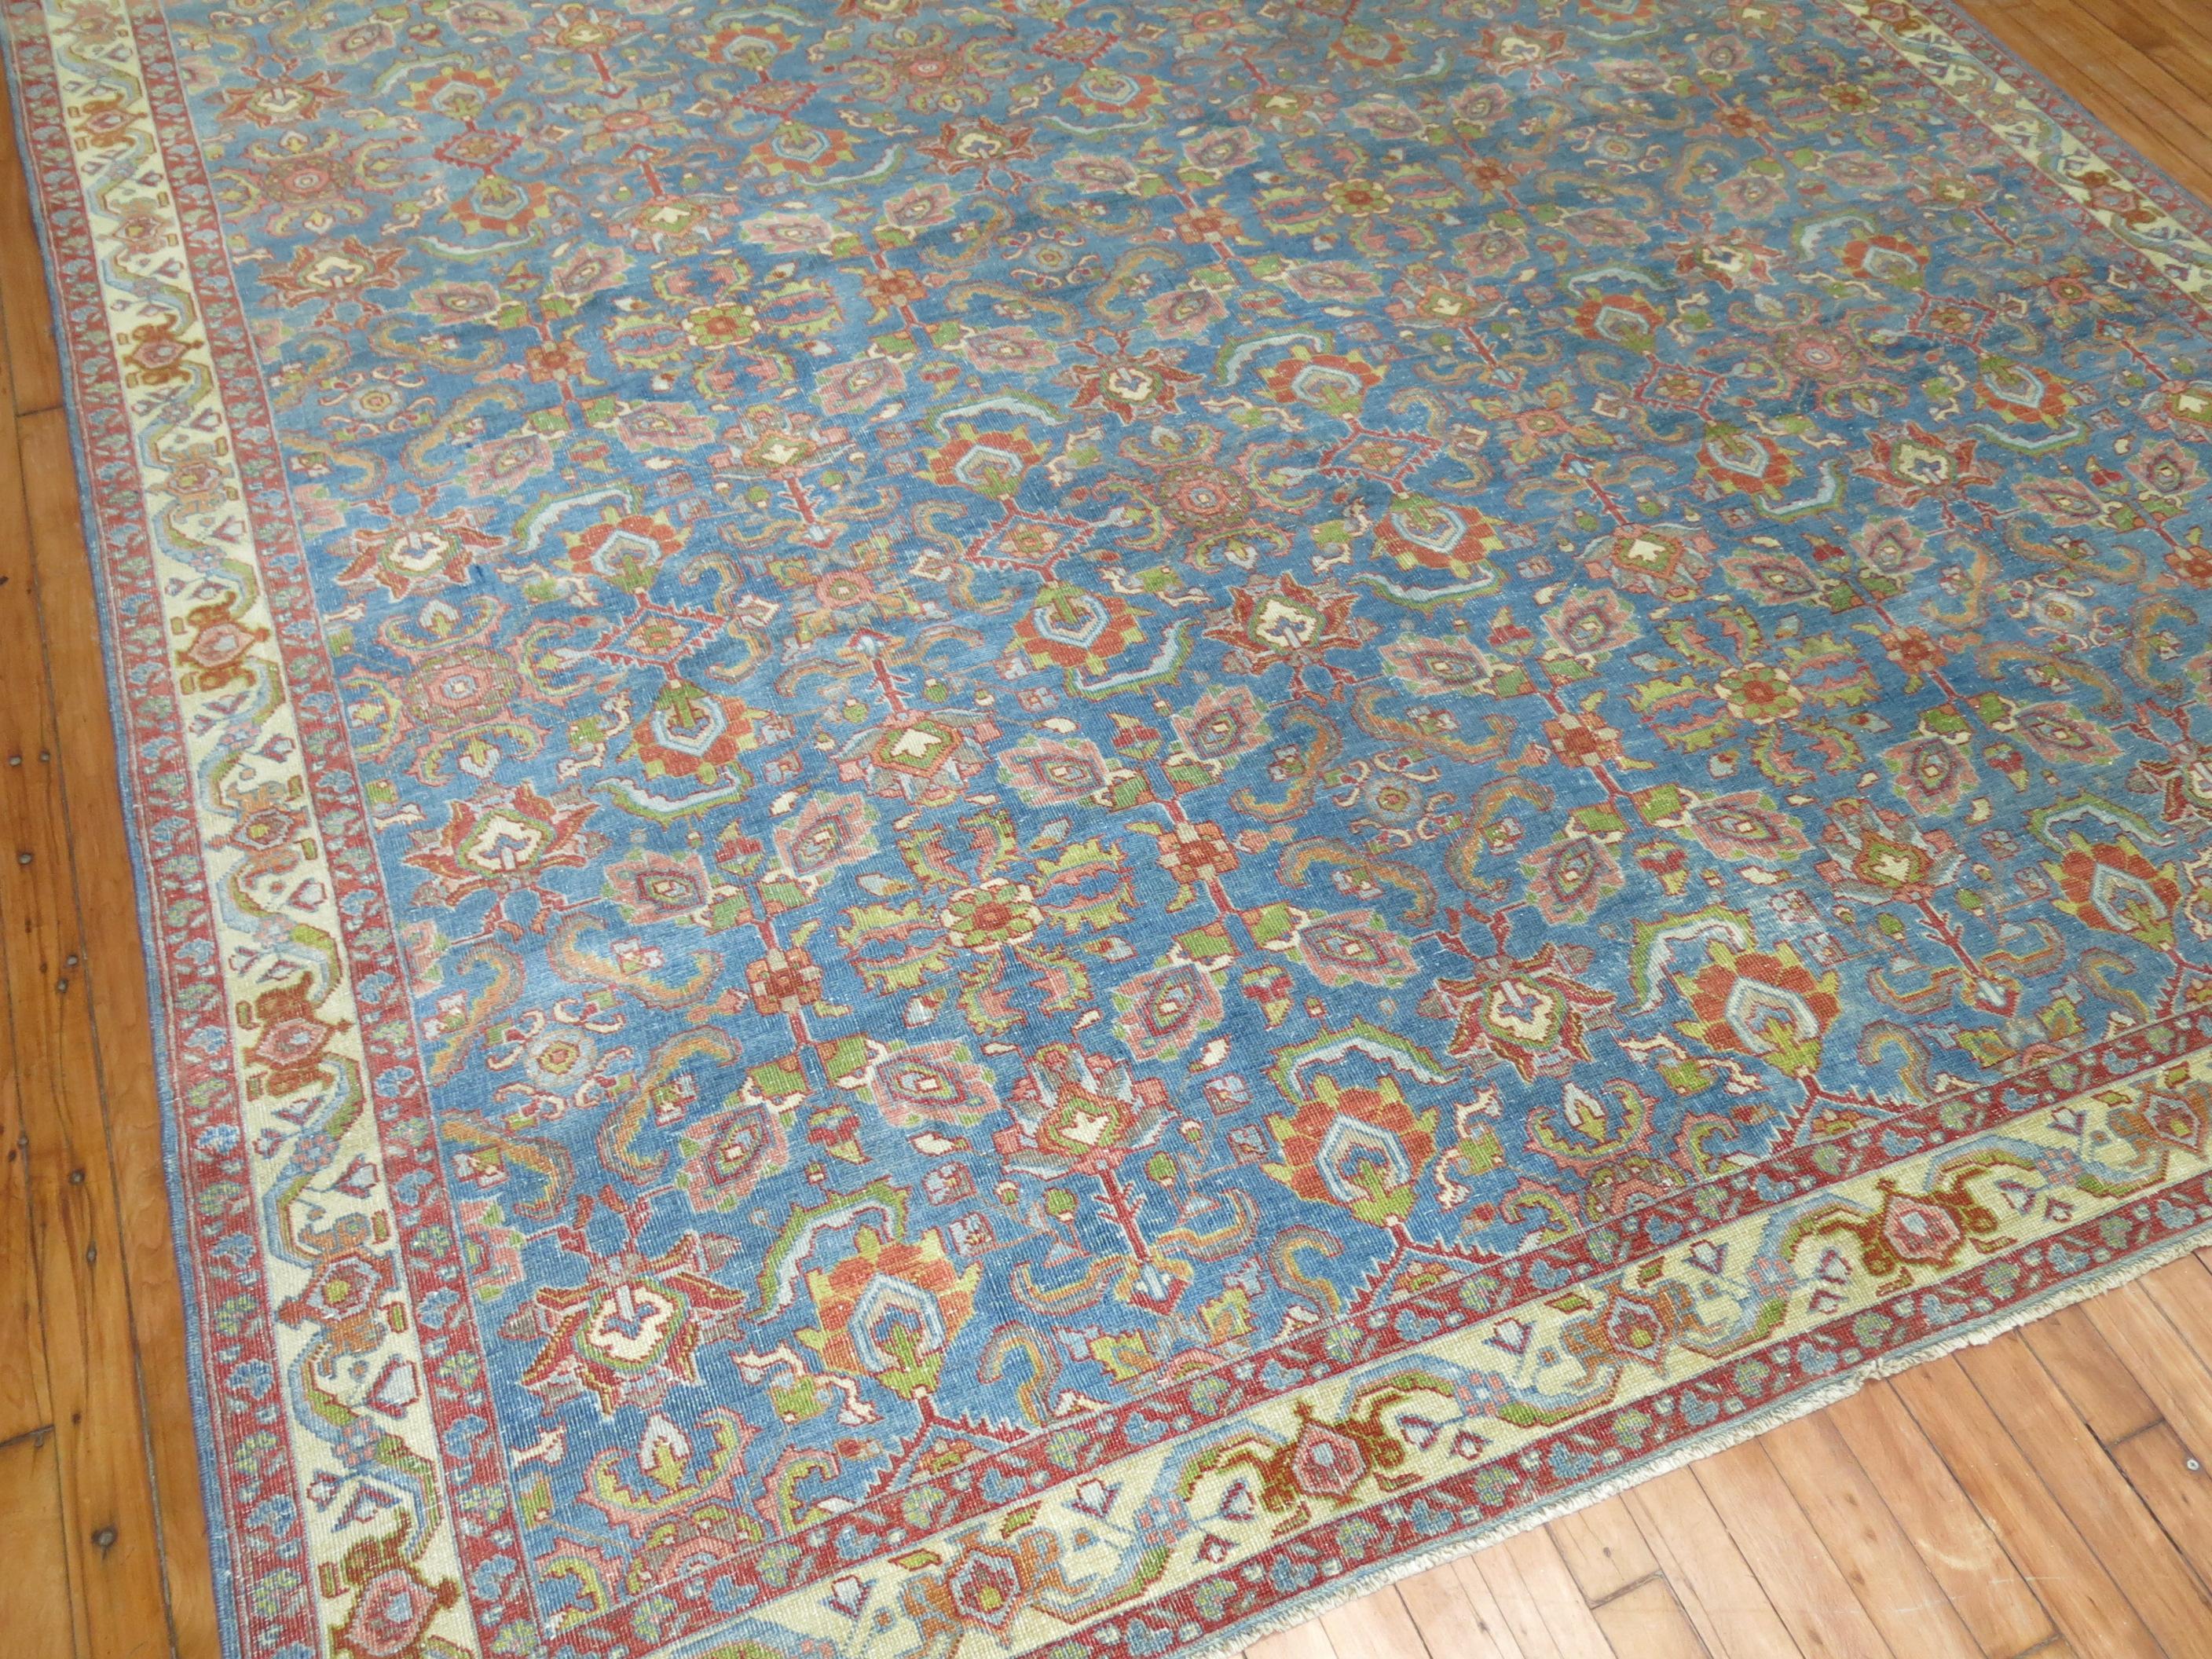 an early 20th Century Persian Mahal room size rug with a blue ground

Measures: 8' x 12'5''

Woven in a series of villages in Western Central Iran, Sultanabad carpets employ over-scale, spacious all-over patterns that are highly prized for their